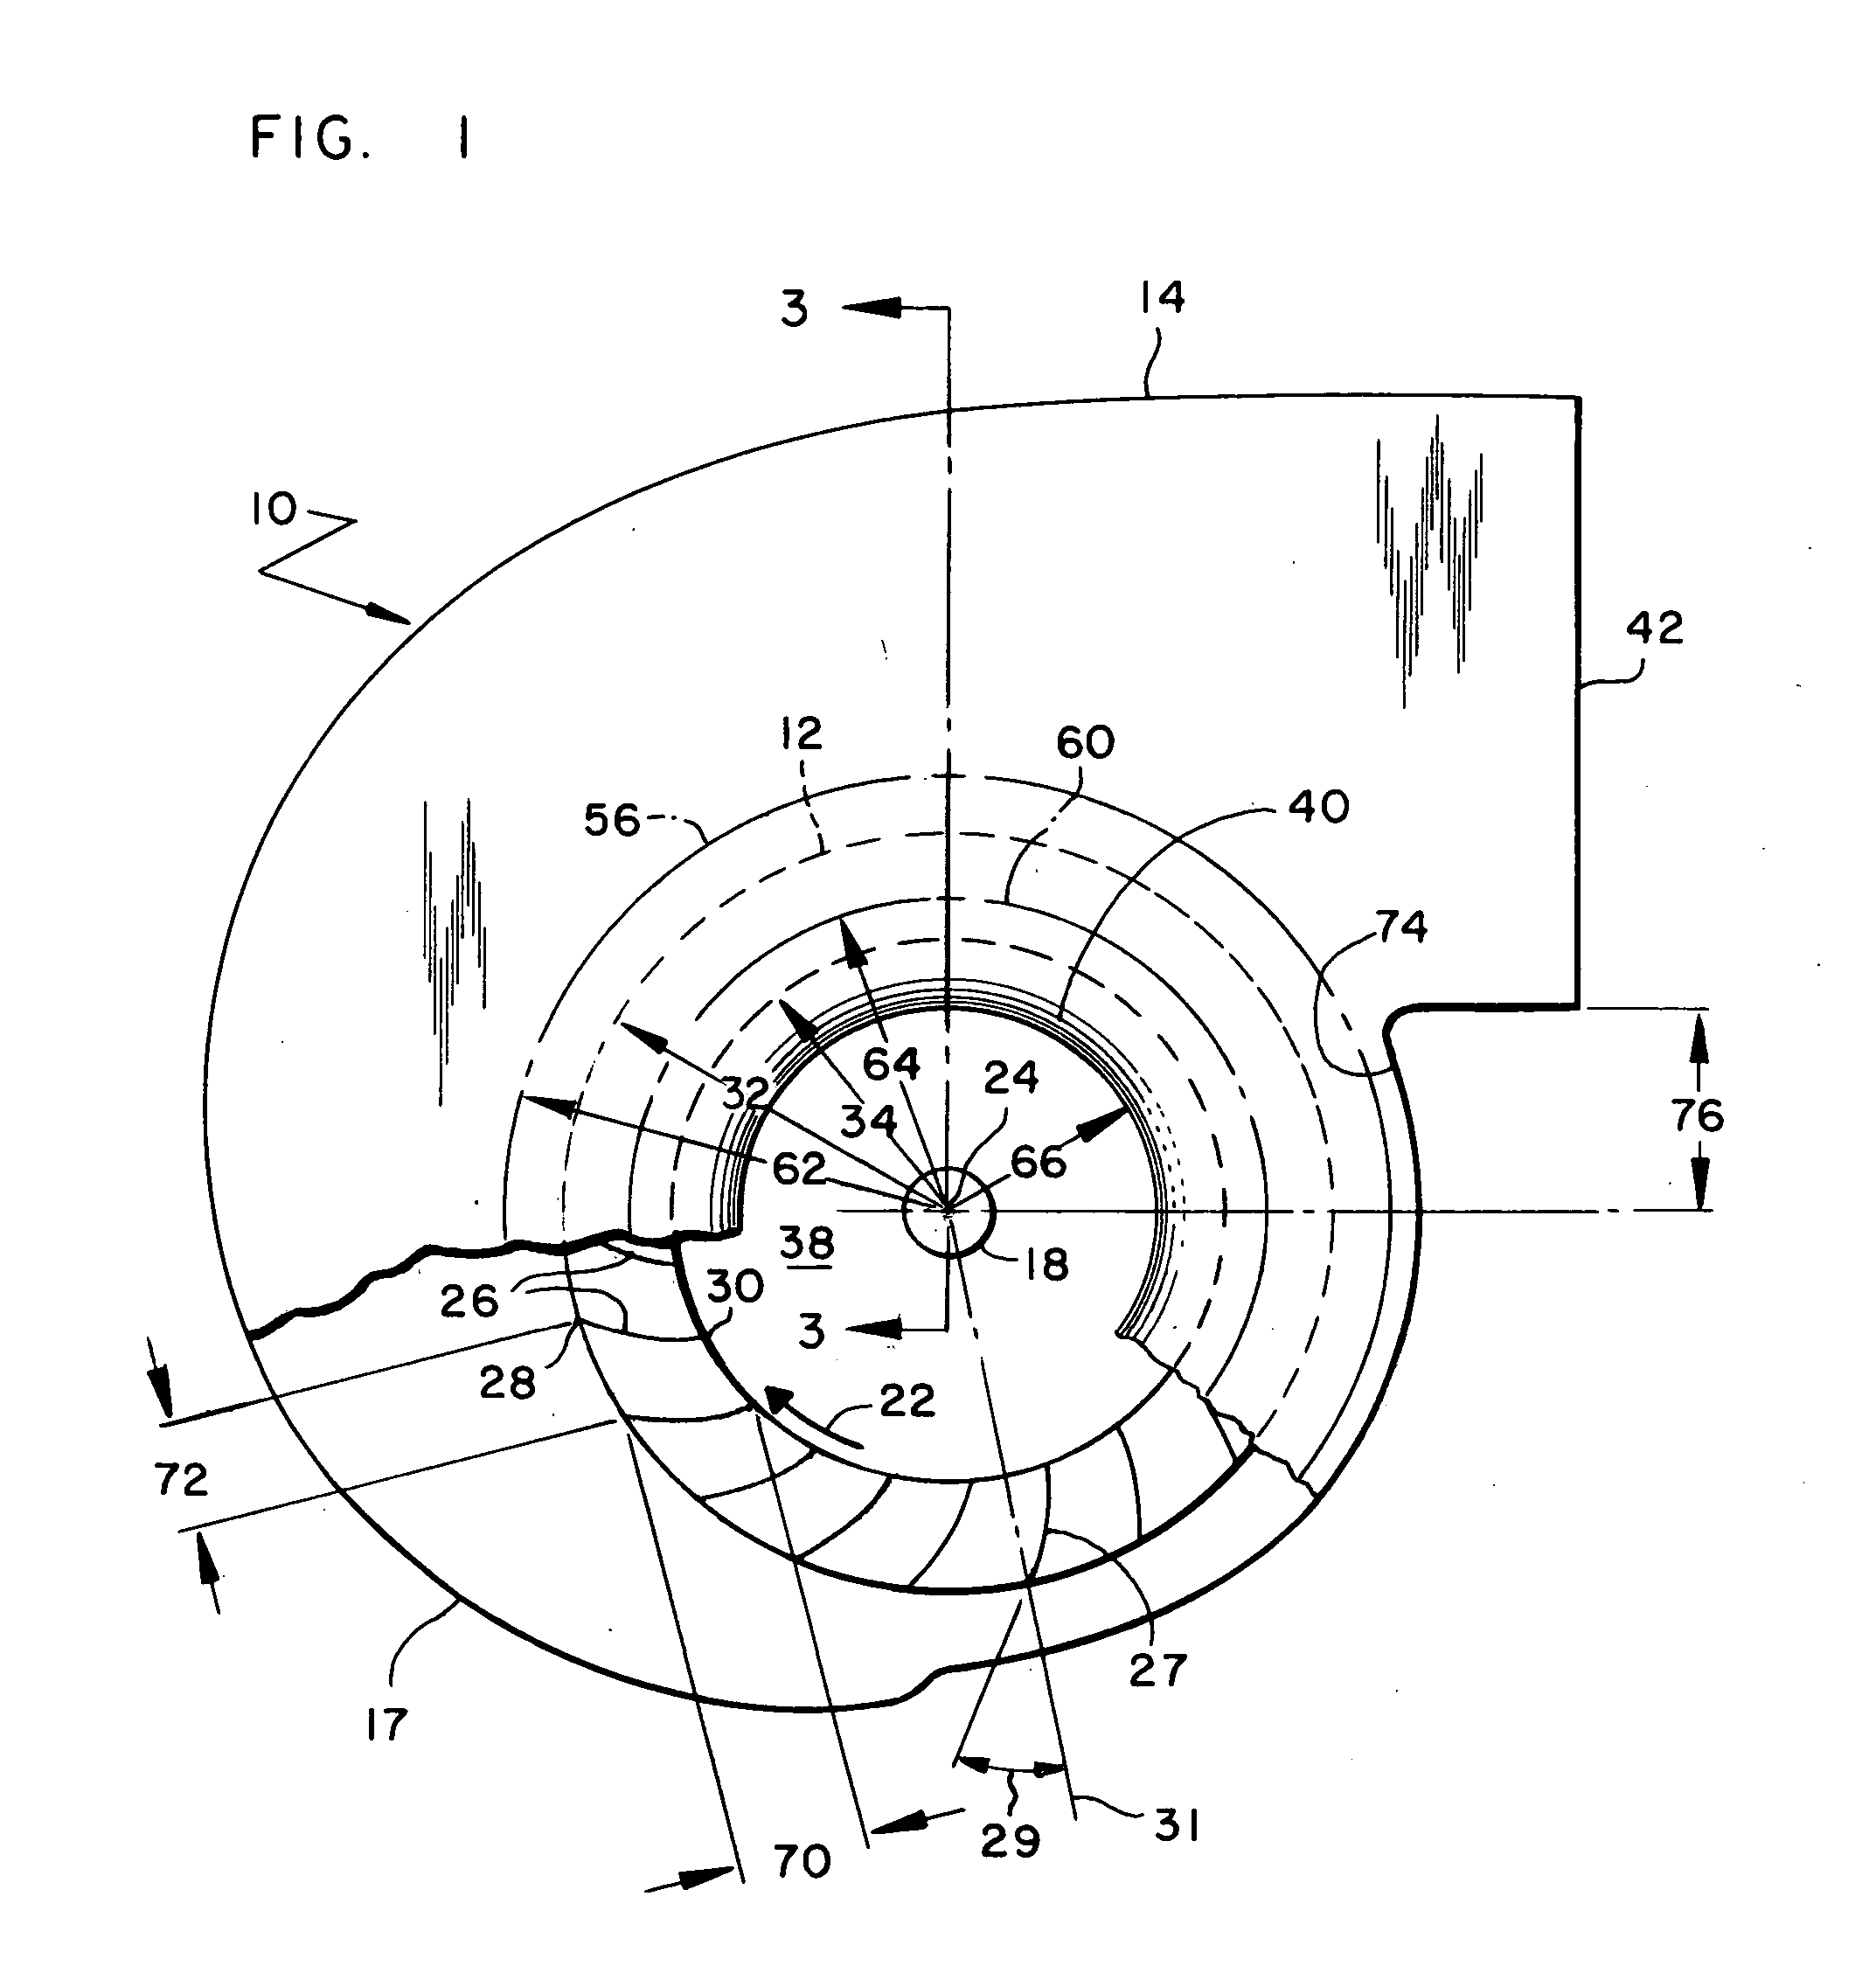 Fan inlet and housing for a centrifugal blower whose impeller has forward curved fan blades